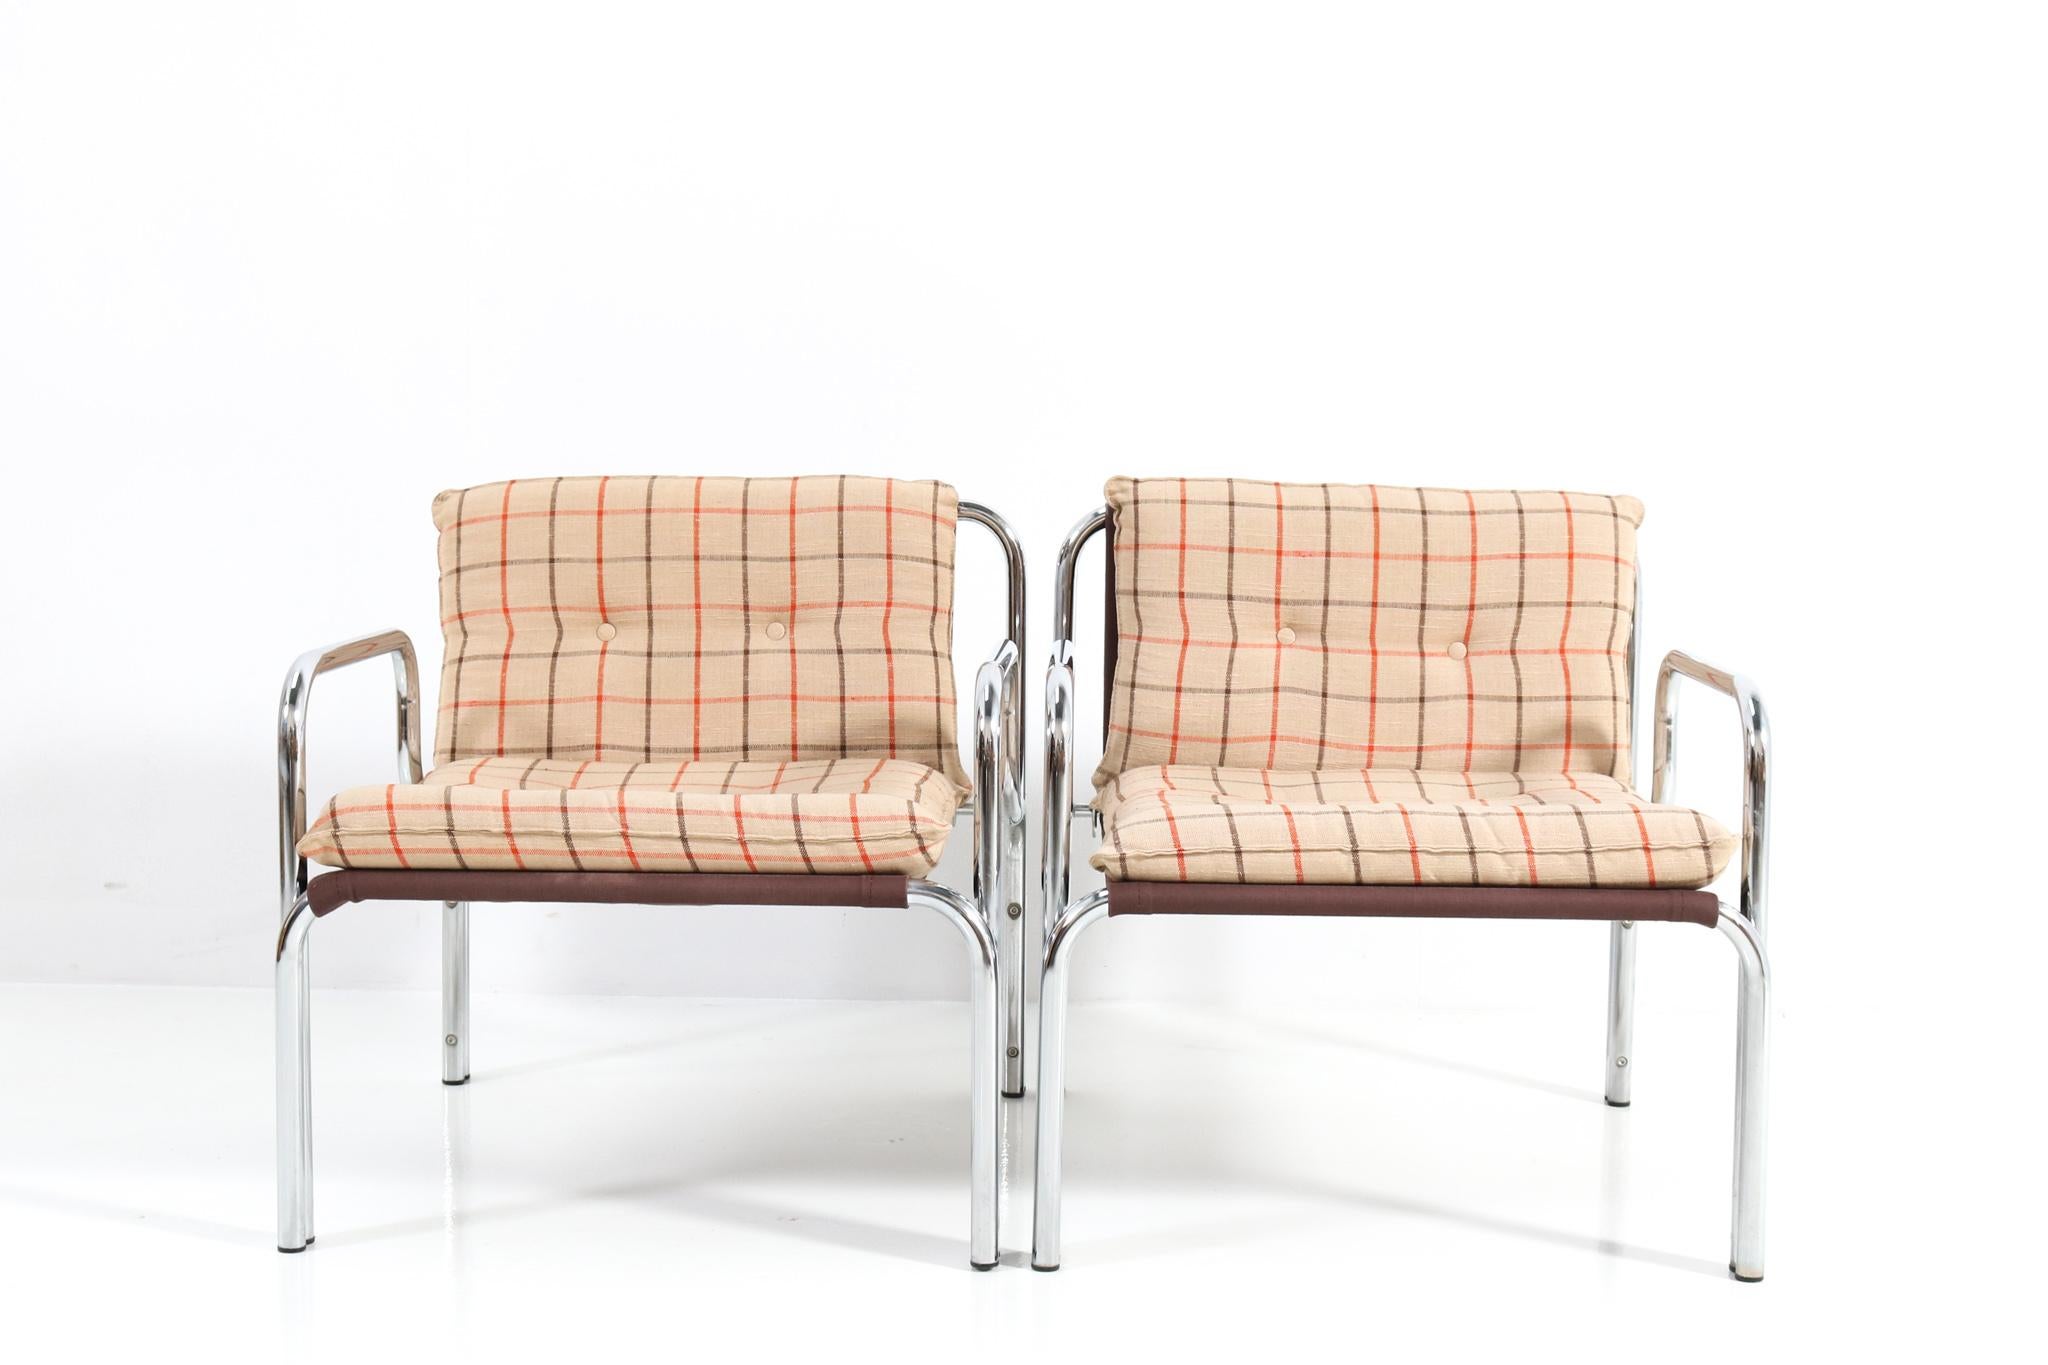 Stunning set of two Mid-Century Modern lounge chairs.
Design by Wim Ypma for Riemersma.
Striking Dutch design from the 1970s.
Chrome plated tubular steel frames with original upholstery.
Marked with original manufacturers label.
This wonderful